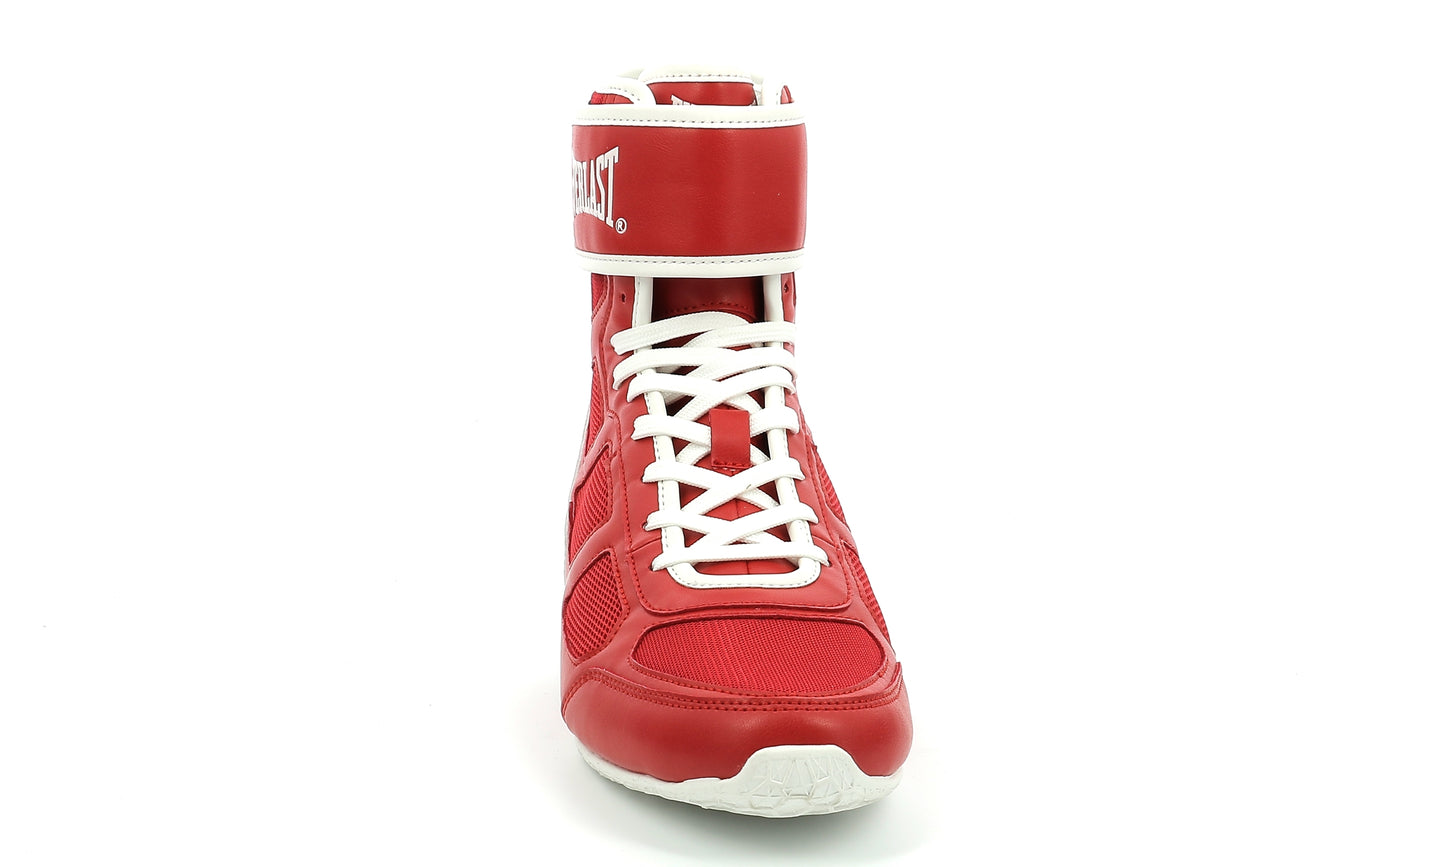 Chaussures de Boxe Everlast Ring Bling - Rouge/Blanc